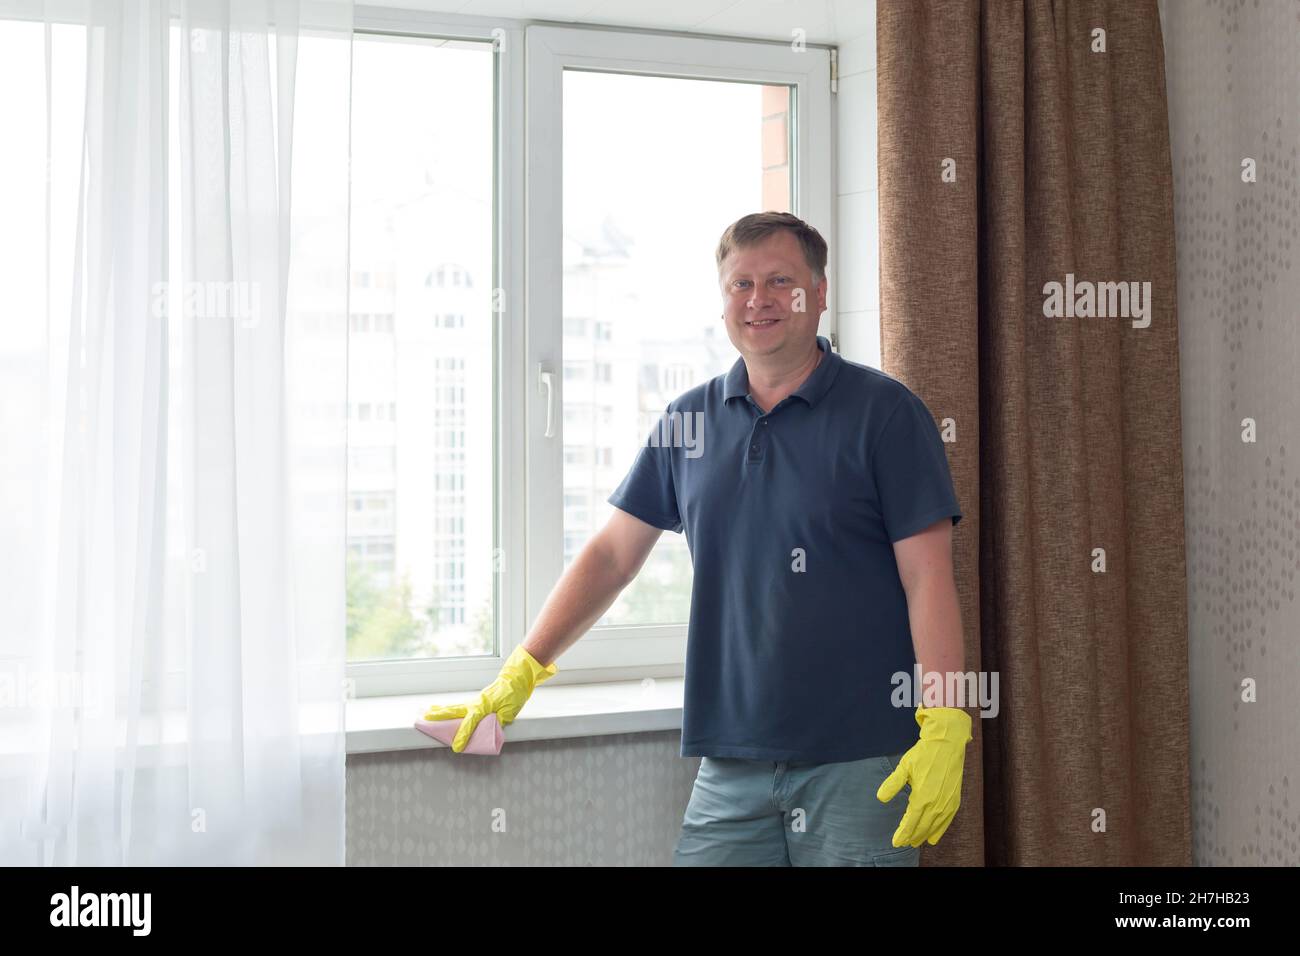 https://c8.alamy.com/comp/2H7HB23/a-man-cleans-his-apartment-wipes-windowsill-in-yellow-rubber-gloves-2H7HB23.jpg